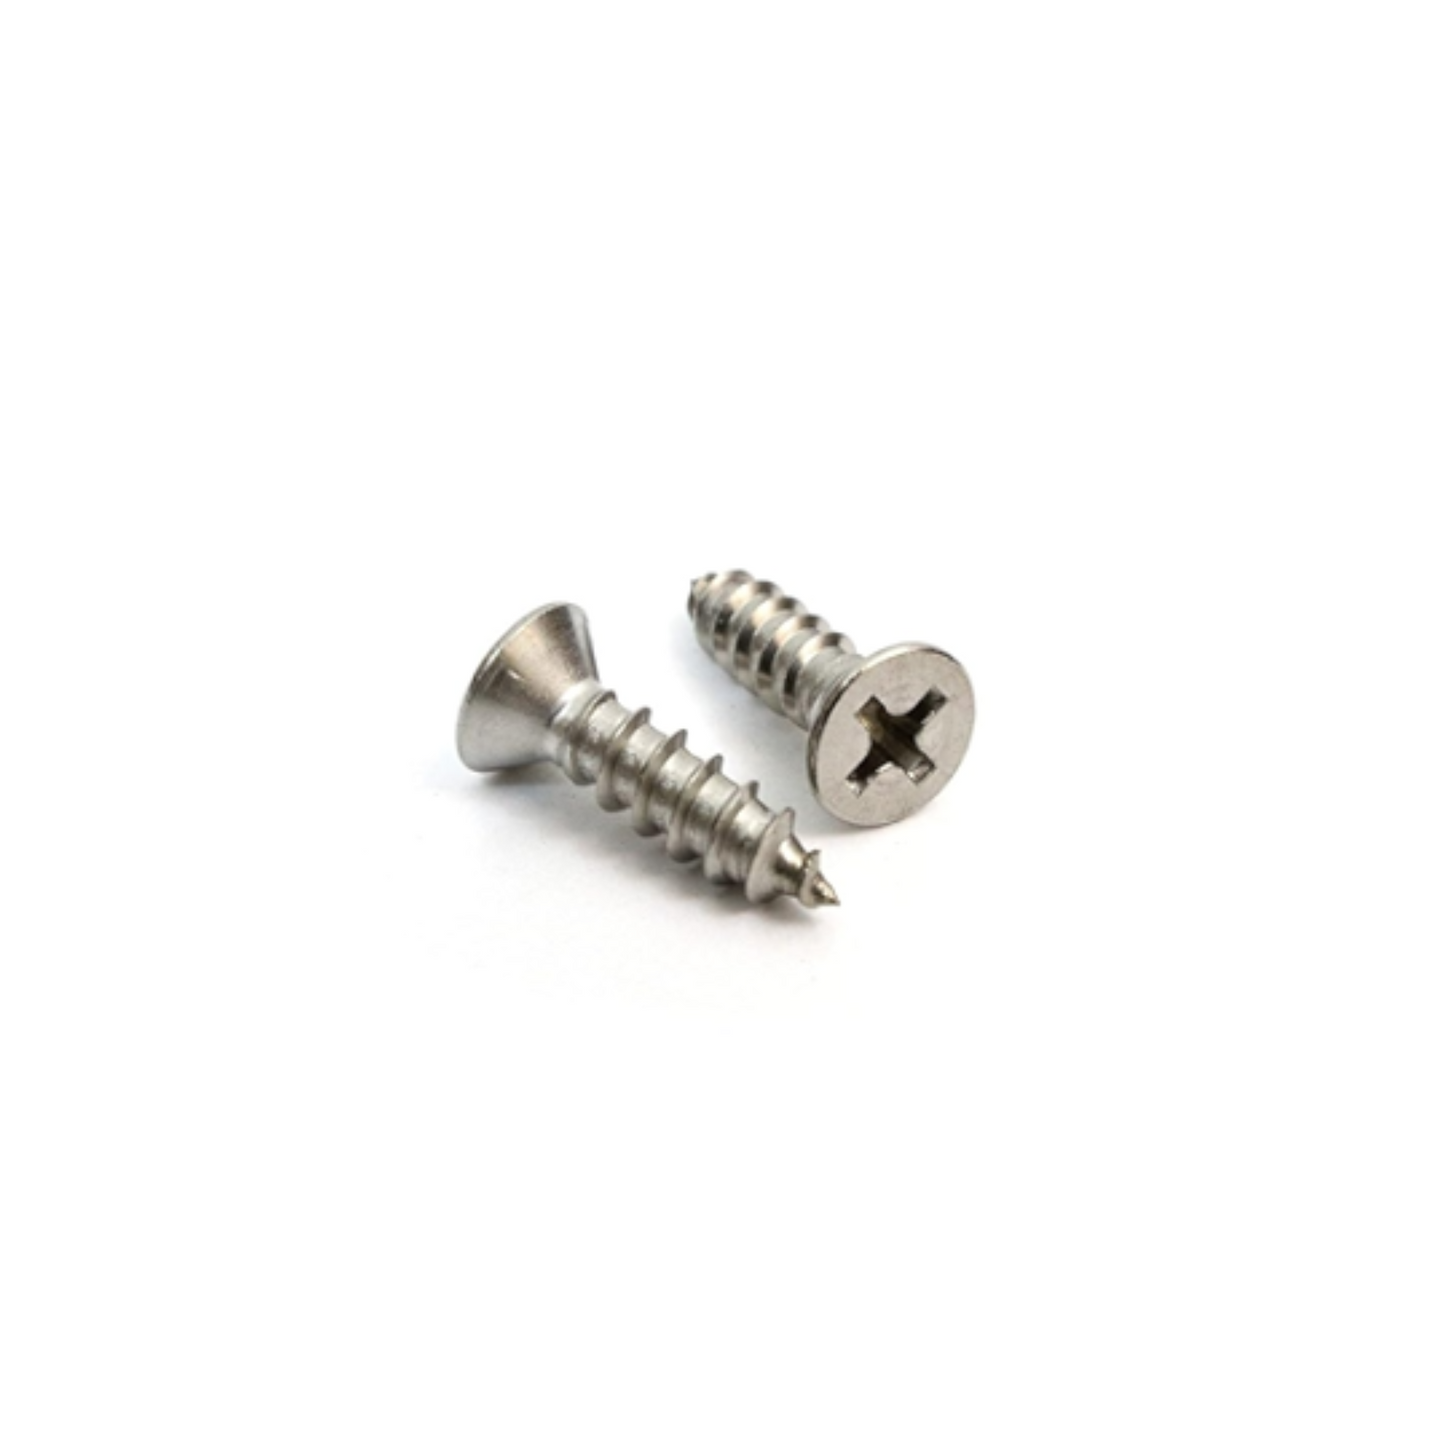 No.4(2.9mm) X 13mm Phillips CSK SS 304 Self Tapping Wood Screw